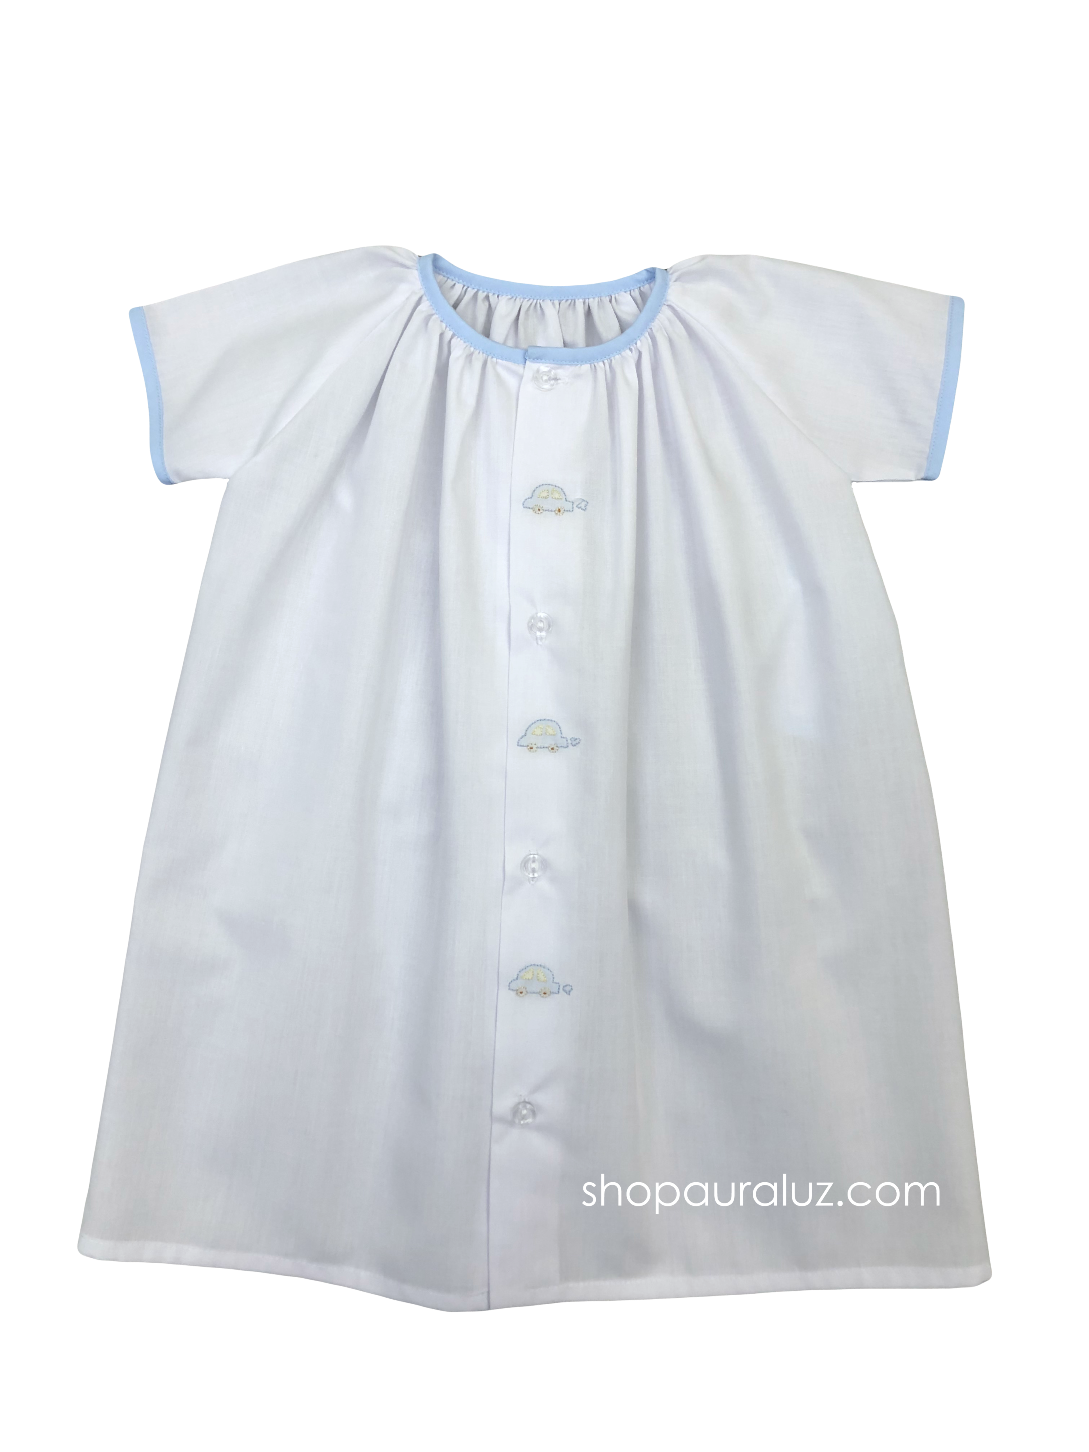 Auraluz Day Gown. White with blue binding trim and embroidered cars